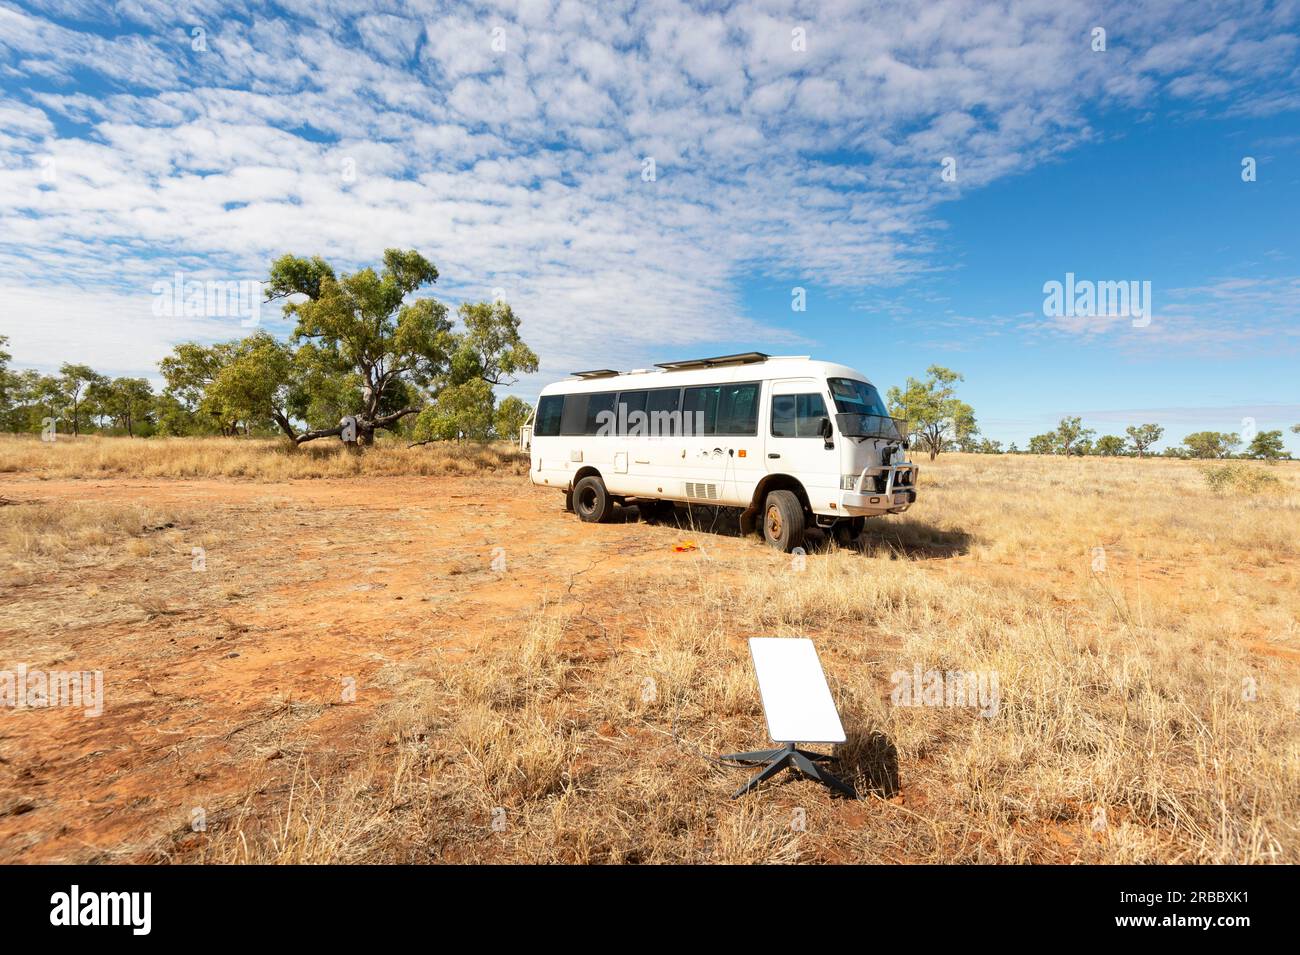 Starlink internet satellite set up while camping in remote Australian Outback, Dajarra, Queensland, QLD, Australia Stock Photo